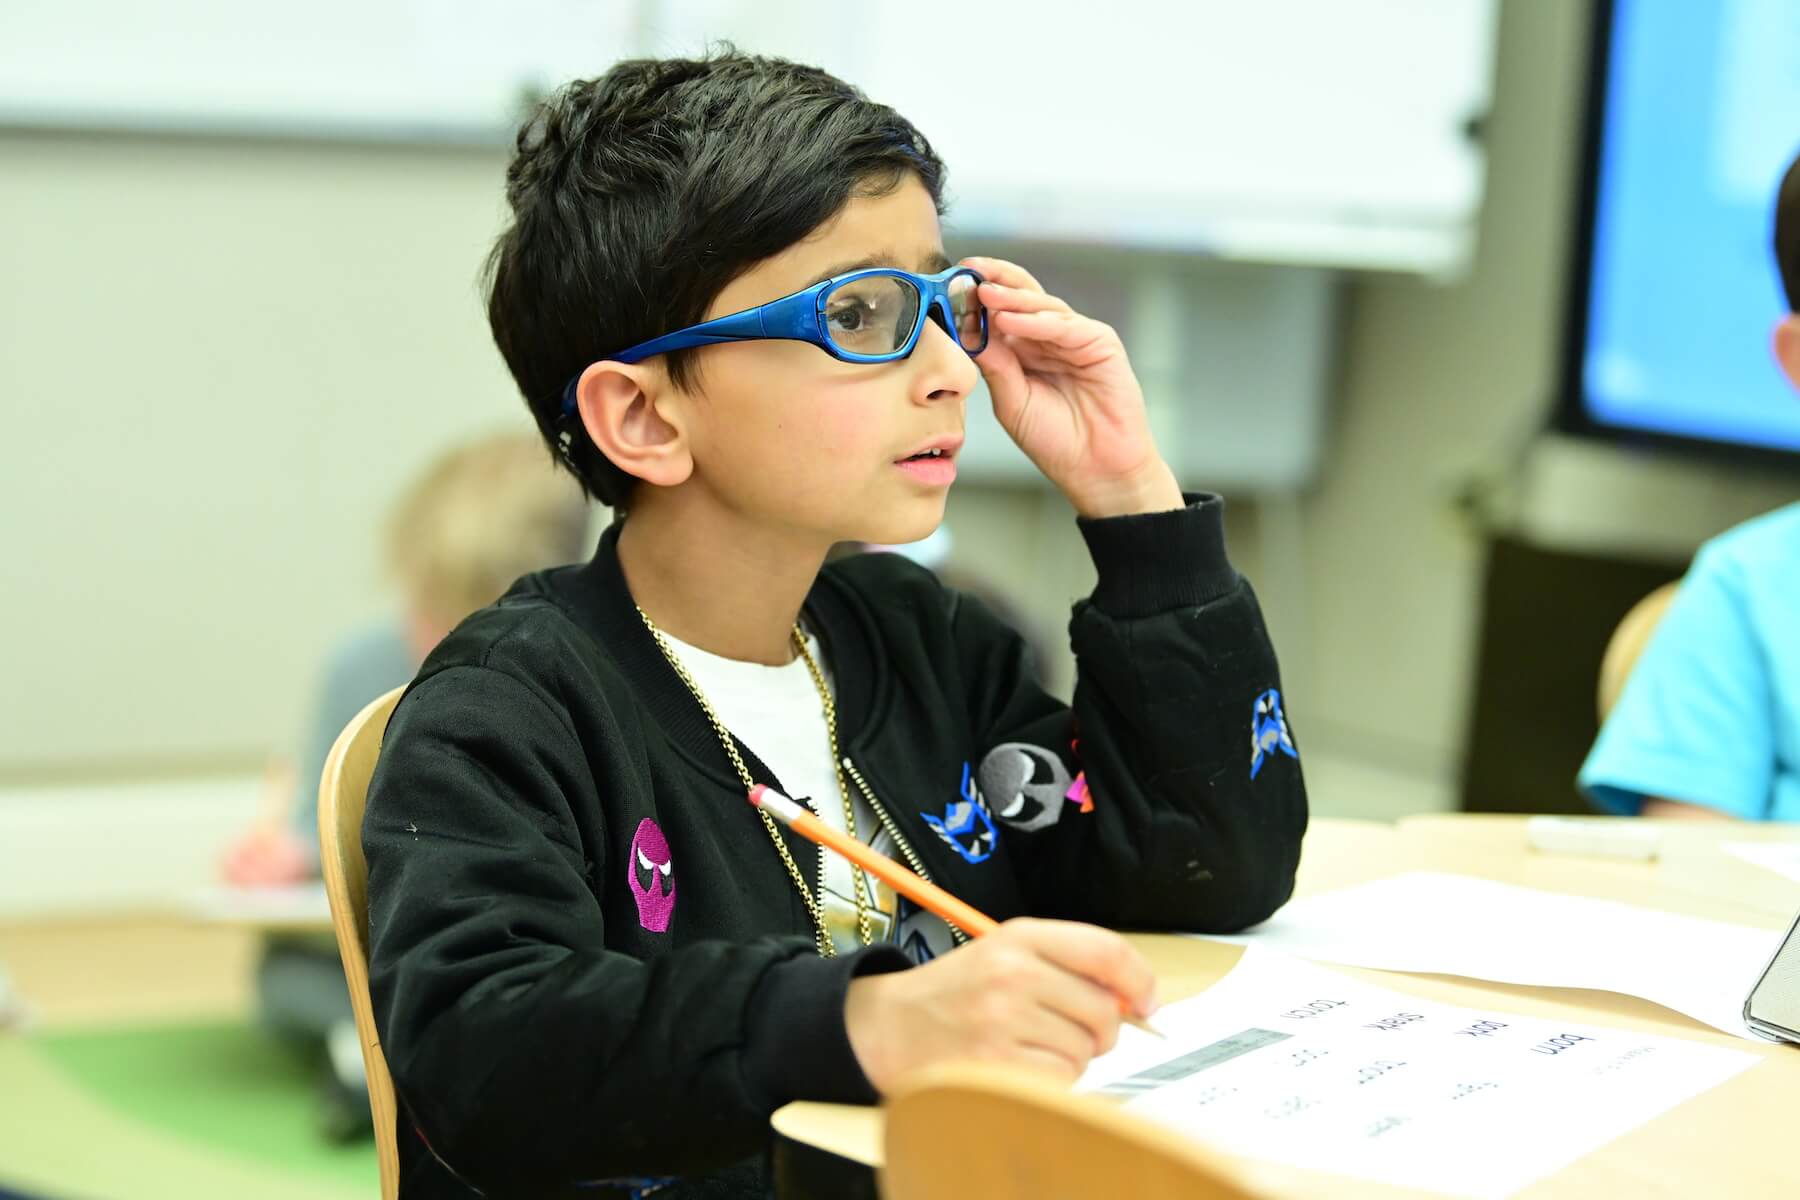 Ethical Culture Fieldston School Ethical Culture student listens intently during class